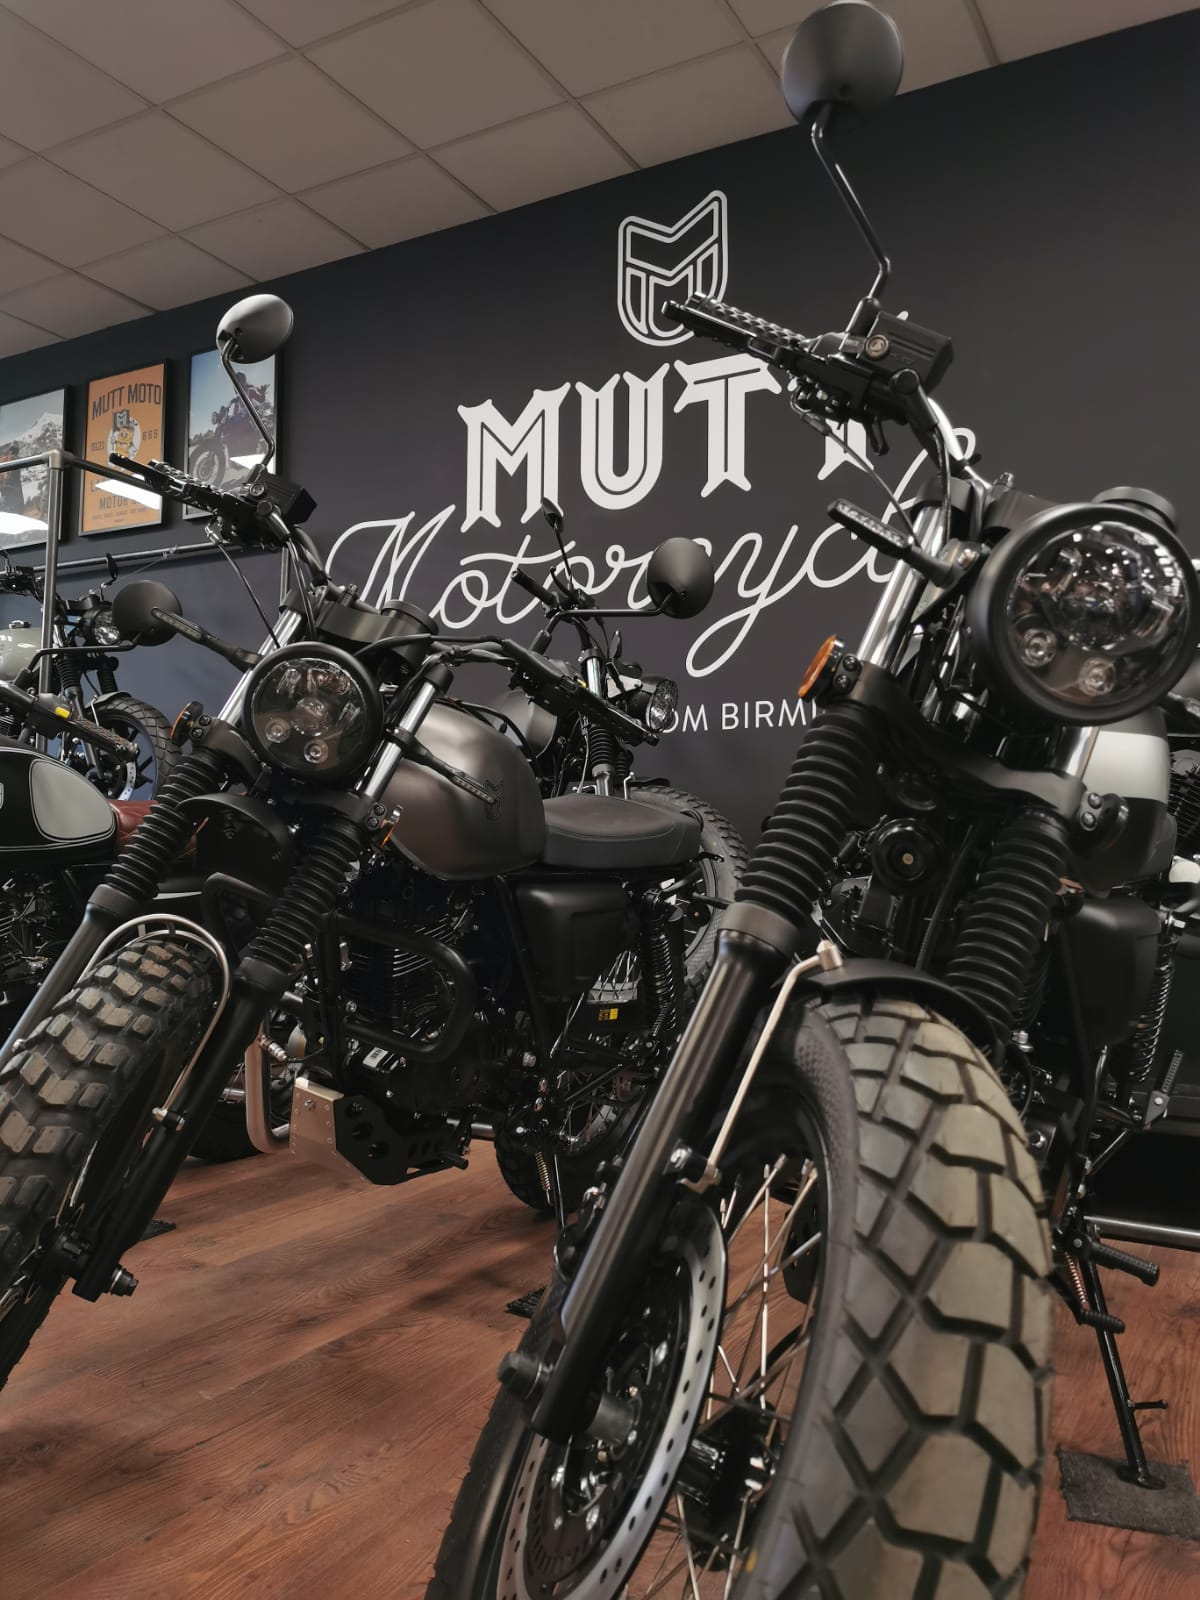 Brand new Mutt Motorcycles area in our showroom at Laguna Motorcycles in Maidstone